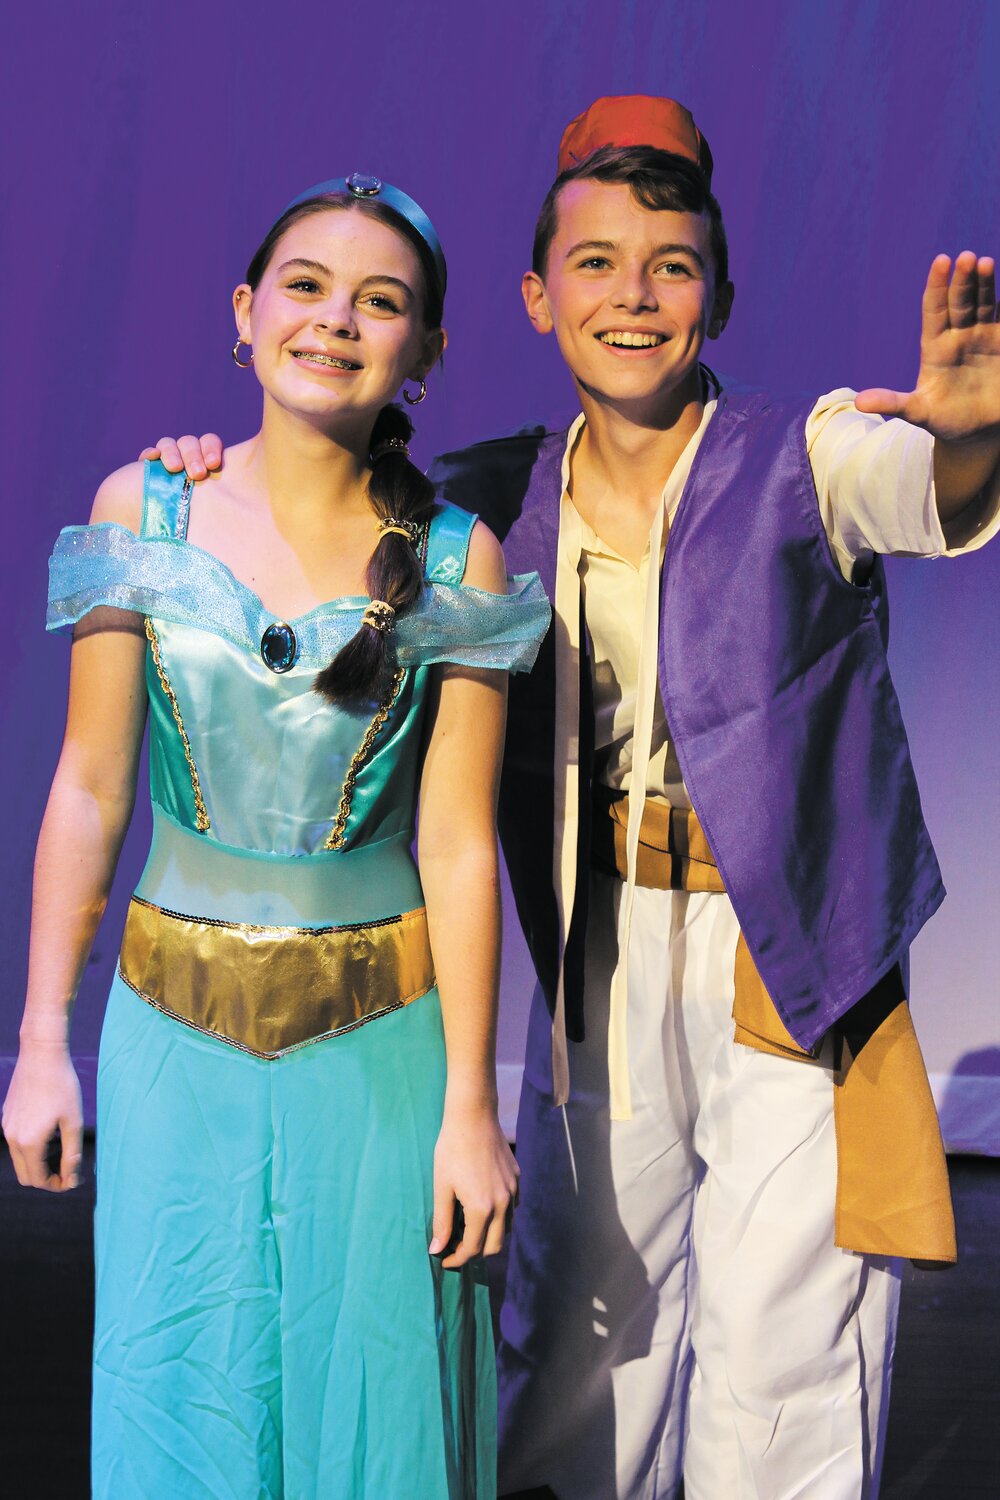 Marlee Reed and Ben Oppy play Princess Jasmine and Aladdin in the NMMS production of Aladdin Jr.